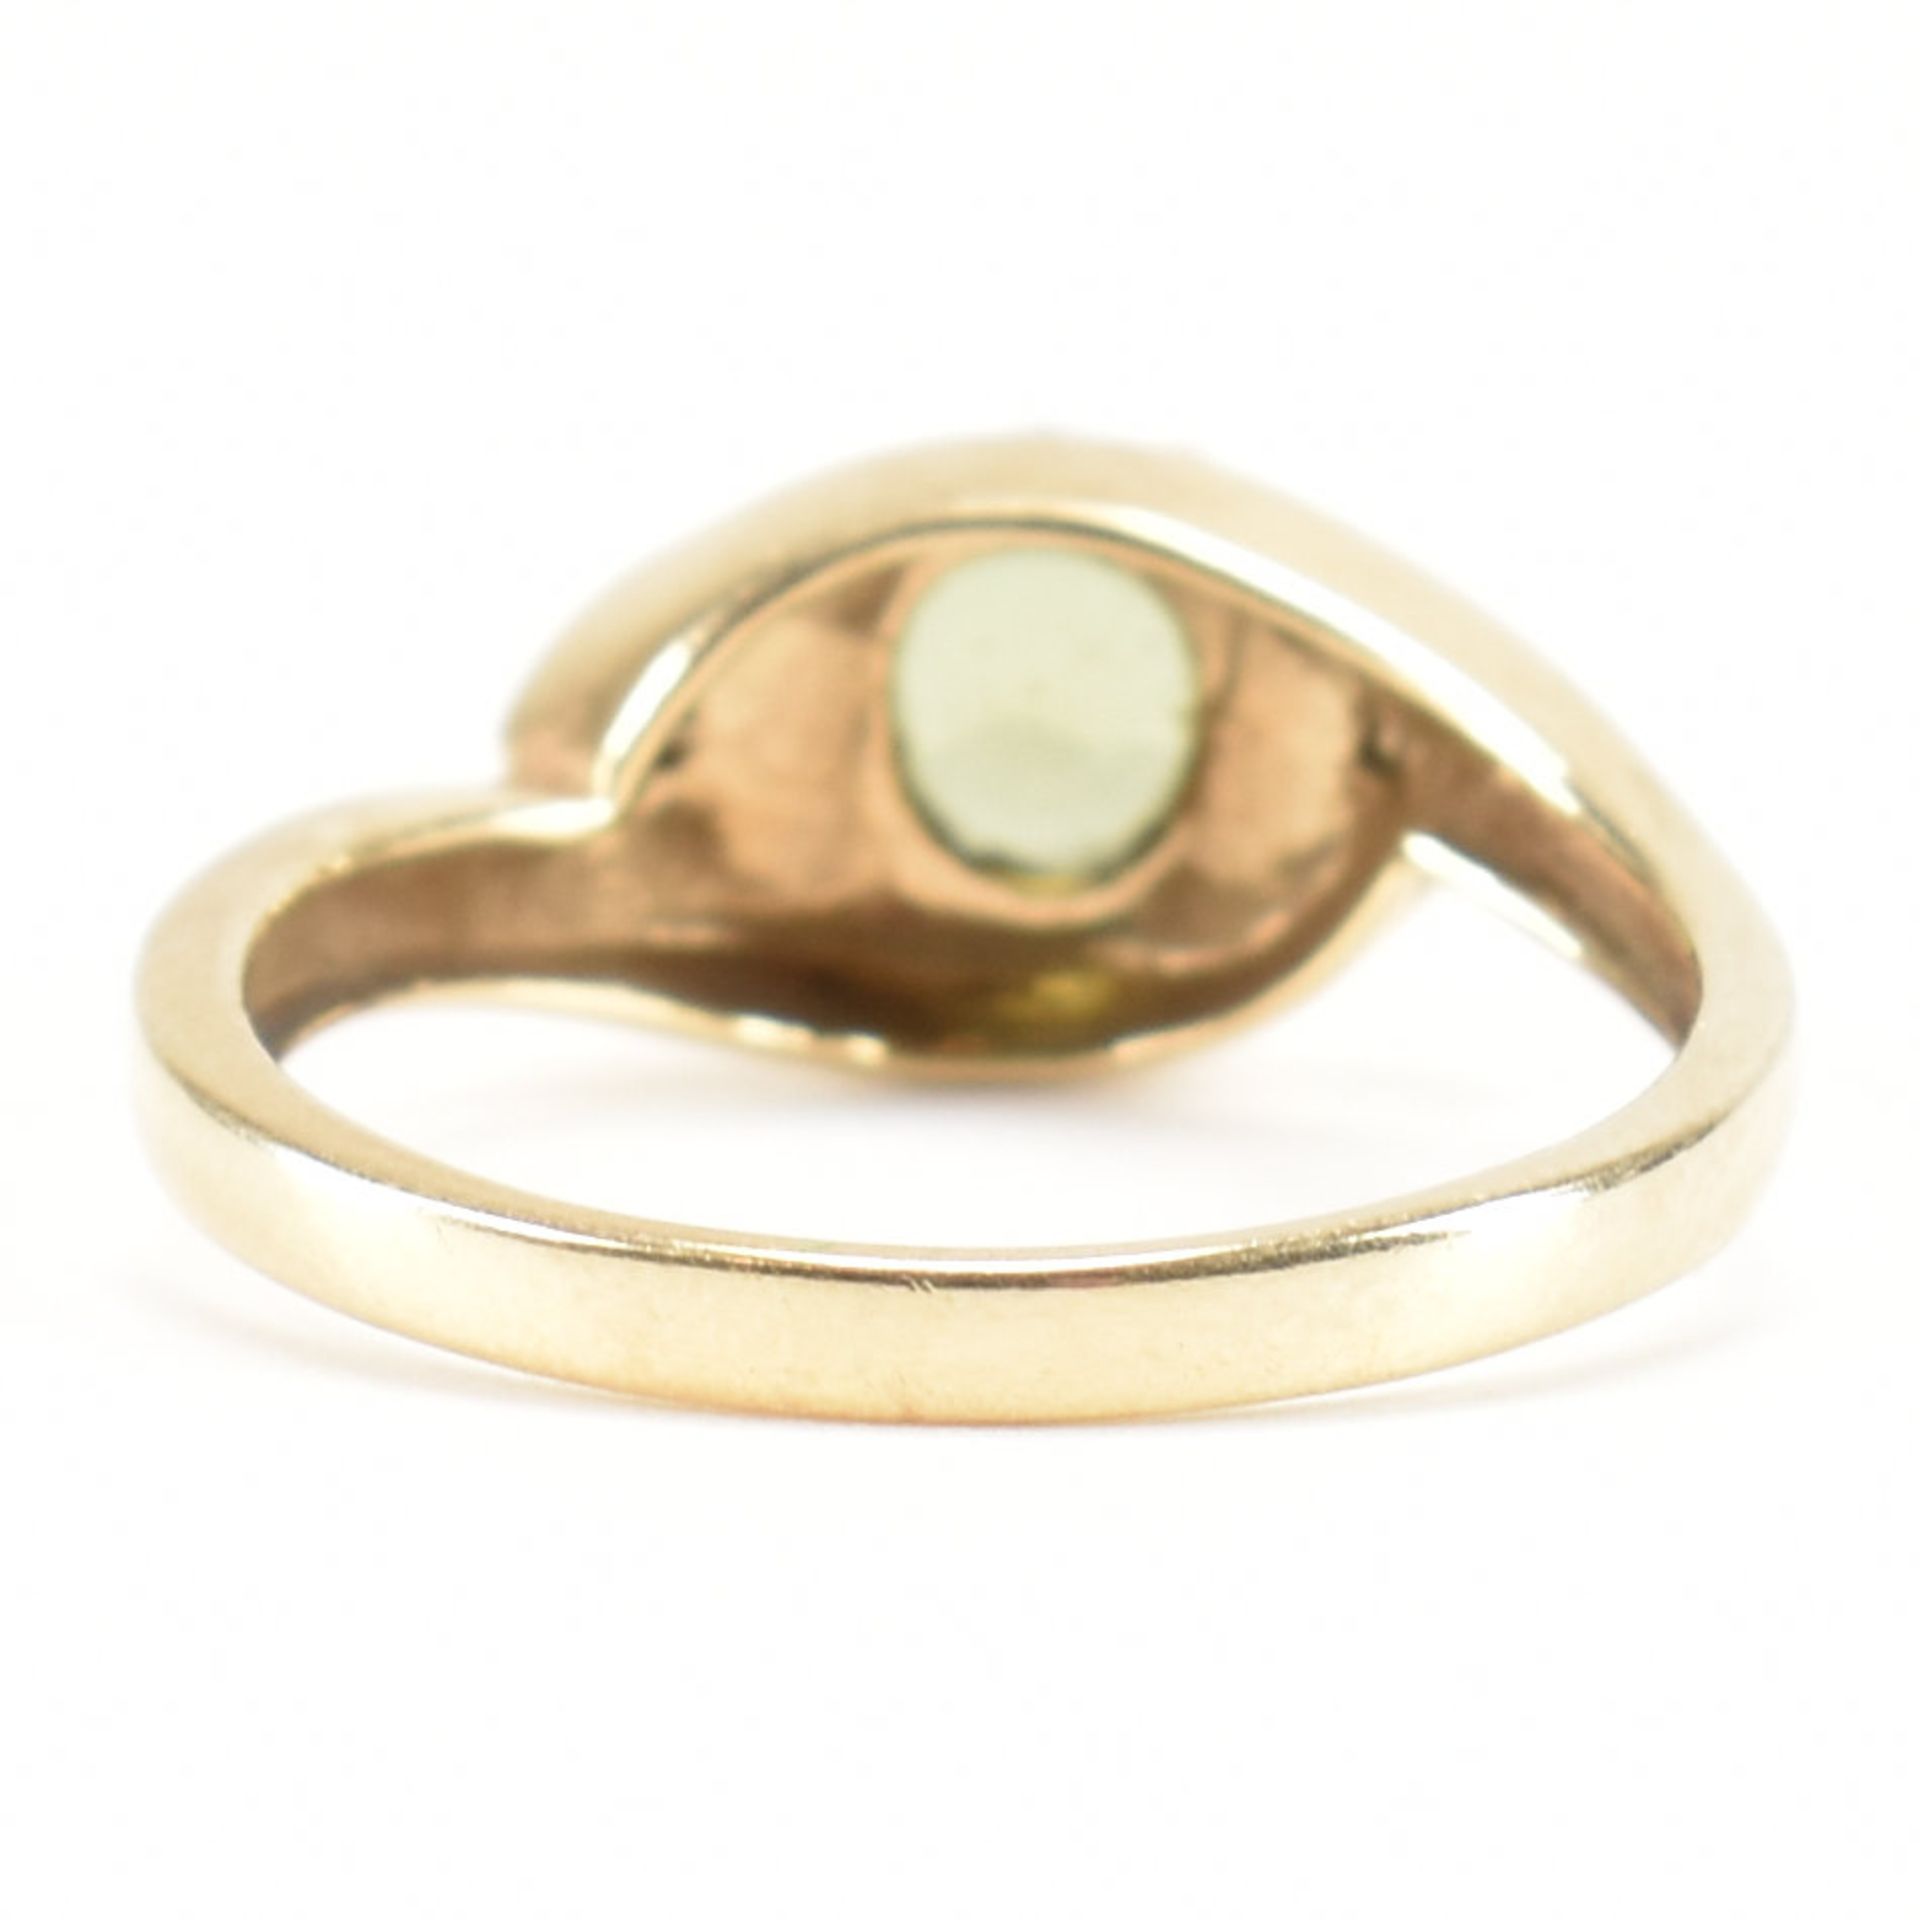 HALLMARKED 9CT GOLD & GREEN STONE CROSSOVER RING - Image 4 of 8